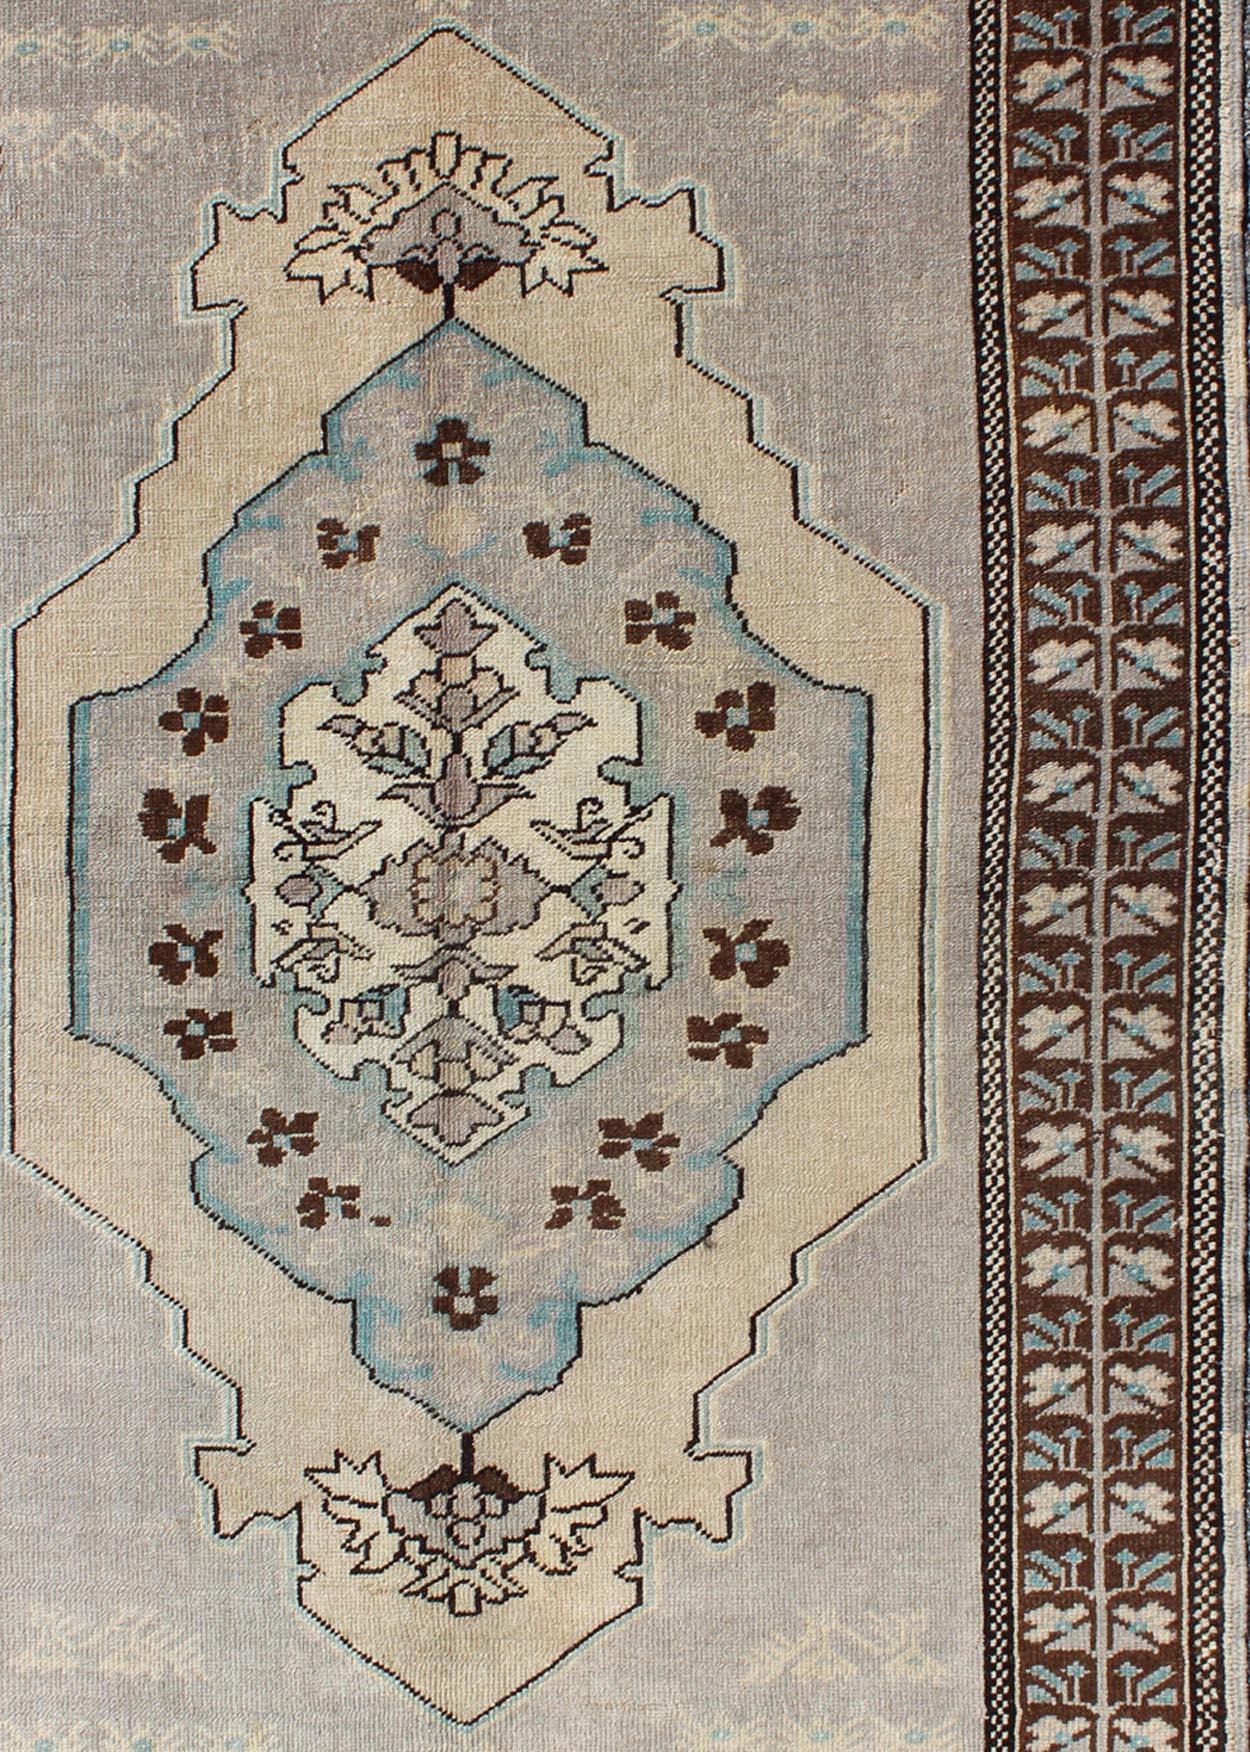 Vintage Turkish Medallion Oushak Area Rug in Gray, Taupe, Brown and Cream

This piece was hand-knotted in the mid-century in Turkey. The field displays a diamond medallion decorated with floral motifs. The field is rendered in cool shades of light